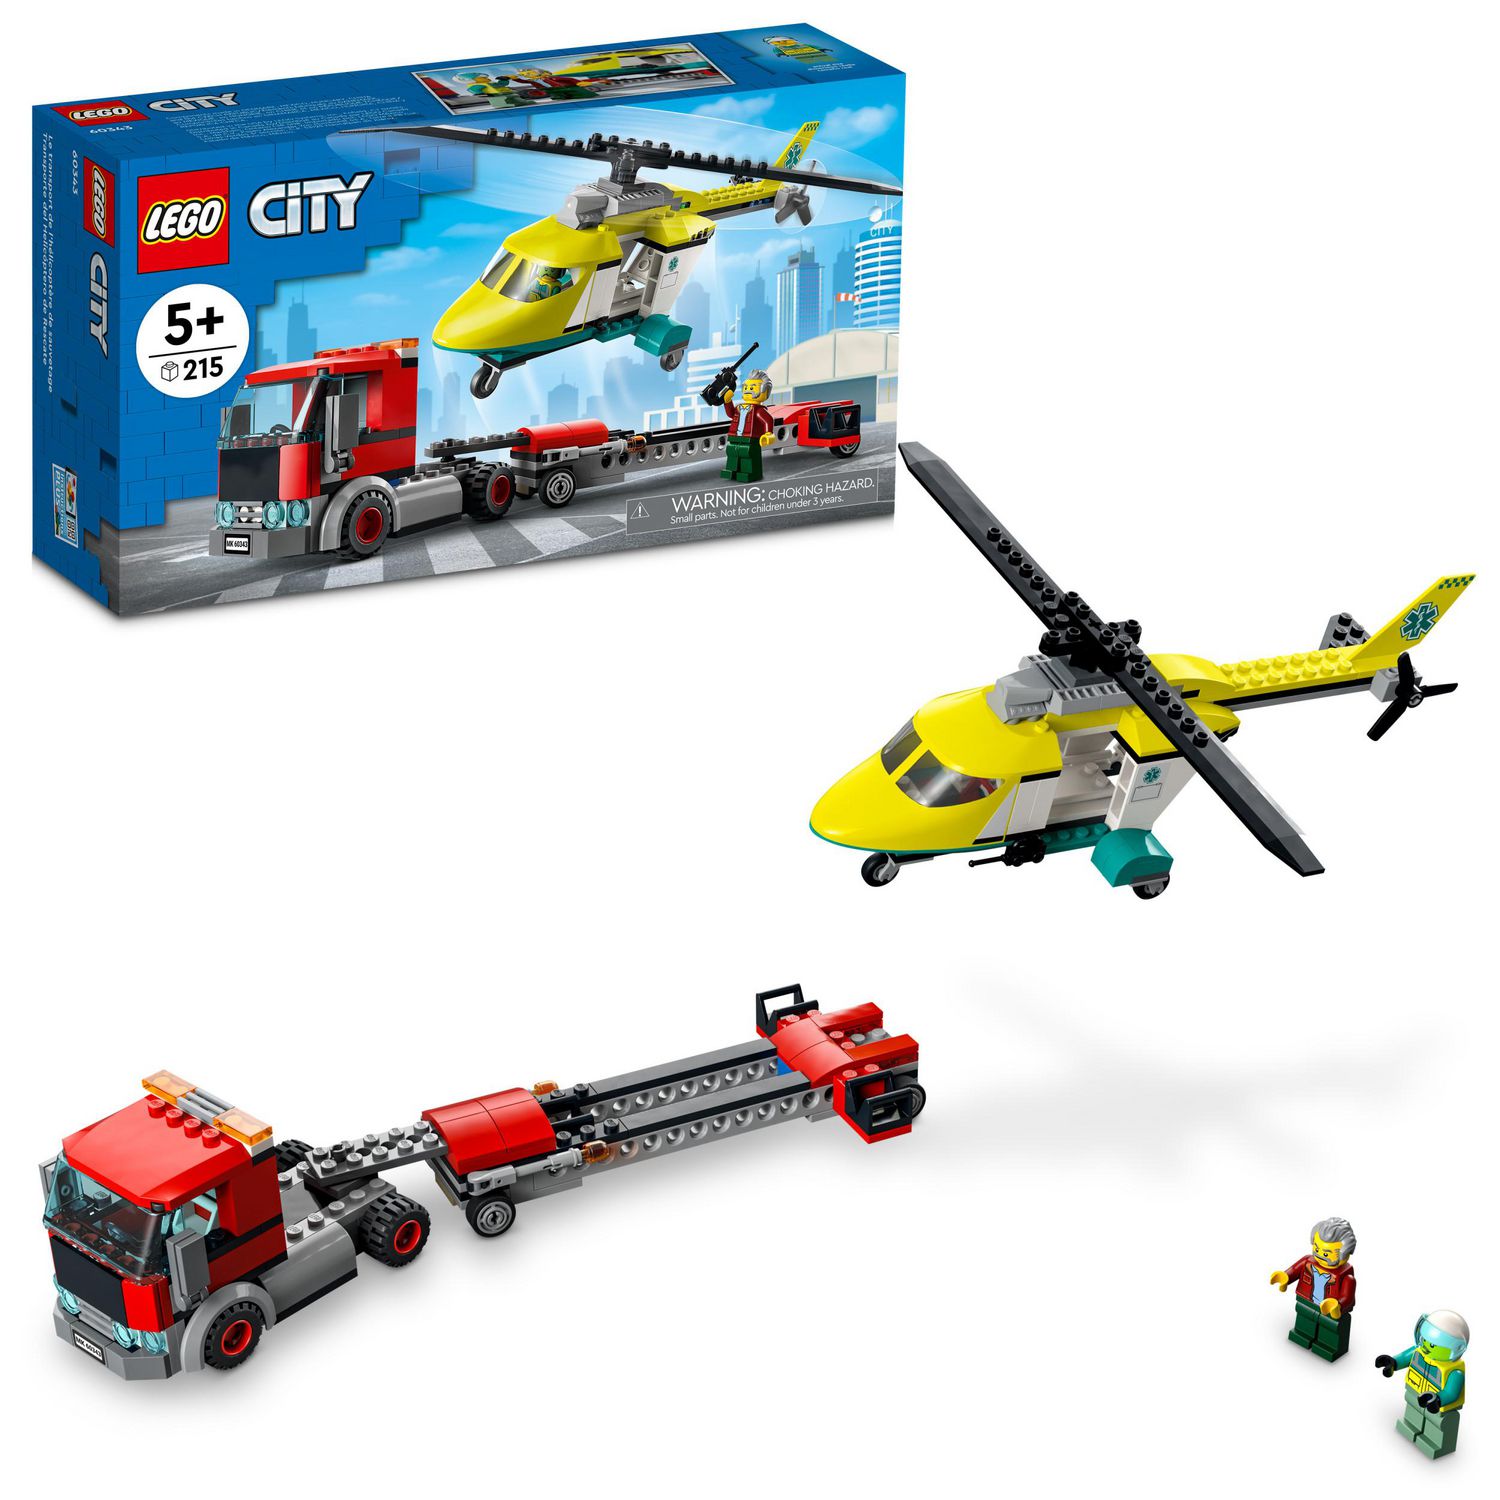 LEGO City Rescue Helicopter Transport 60343 Toy Building Kit (215 Pieces)